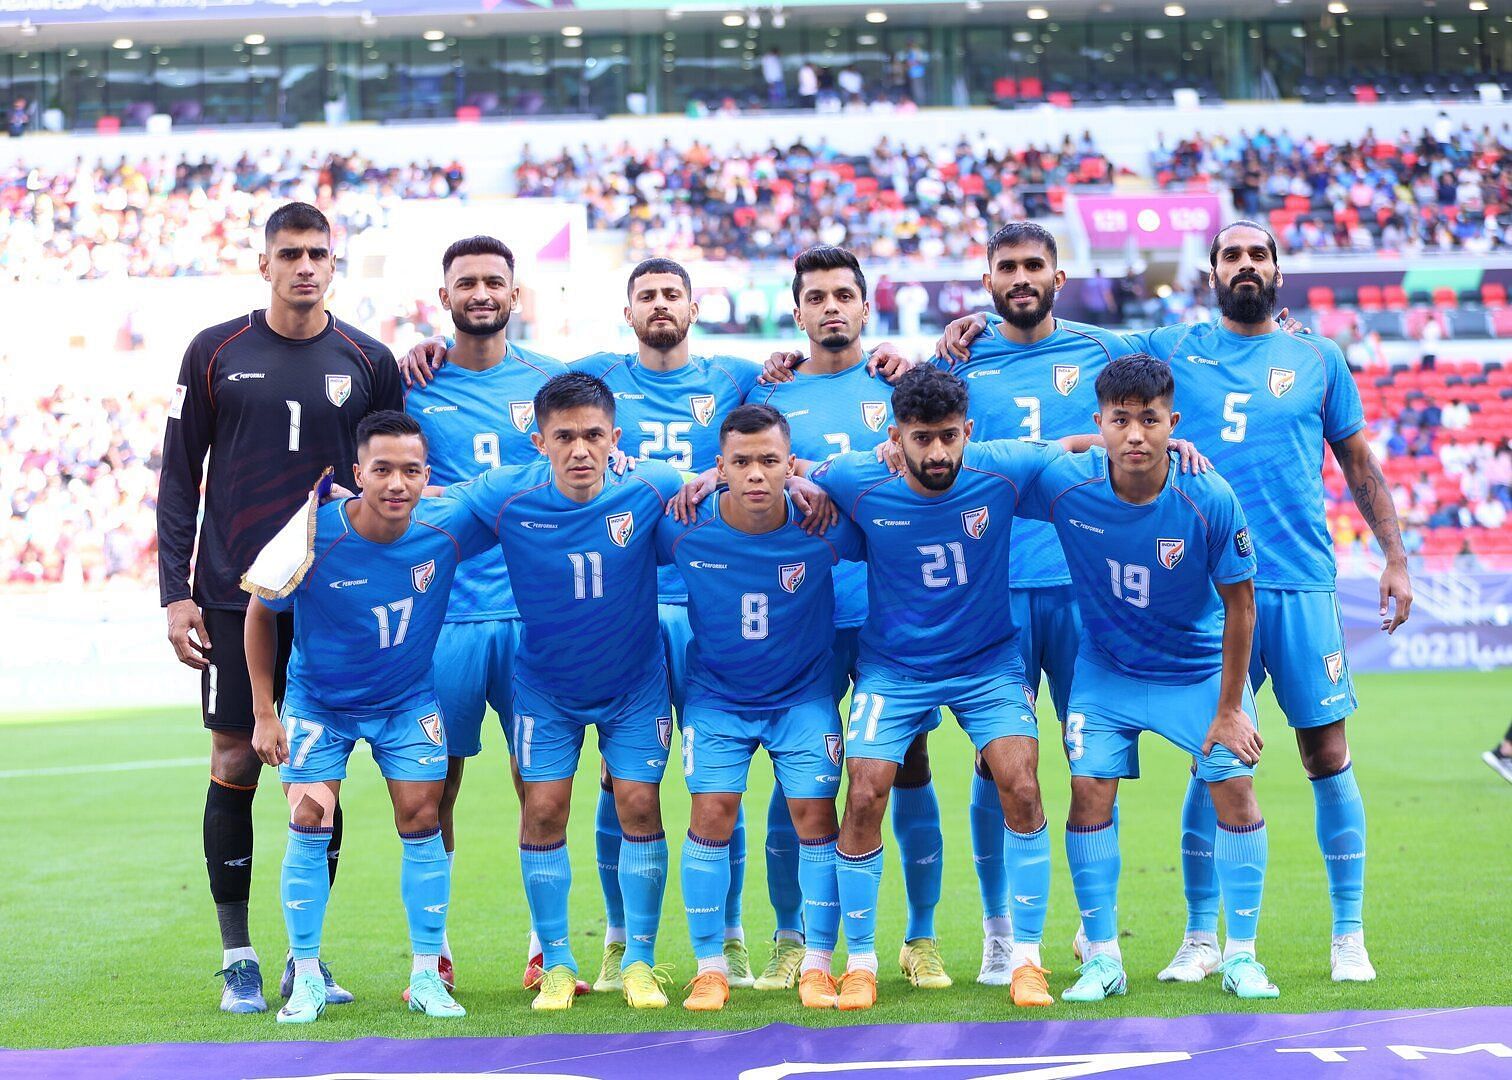 The All India Football Federation (AIFF) president Kalyan Chaubey has on Sunday, March 10, announced that India